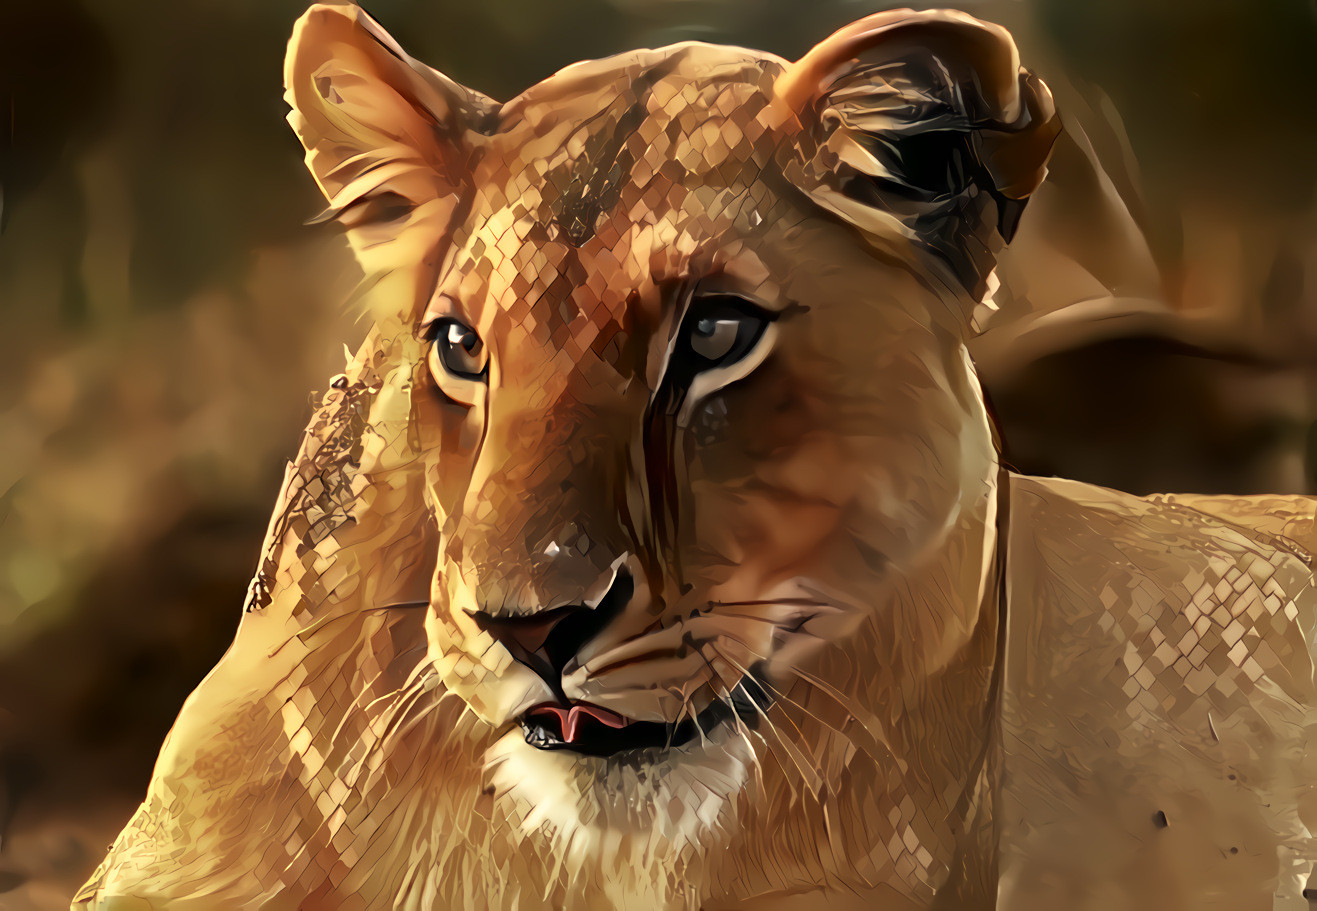 Lovely Lioness  [1.2MP]